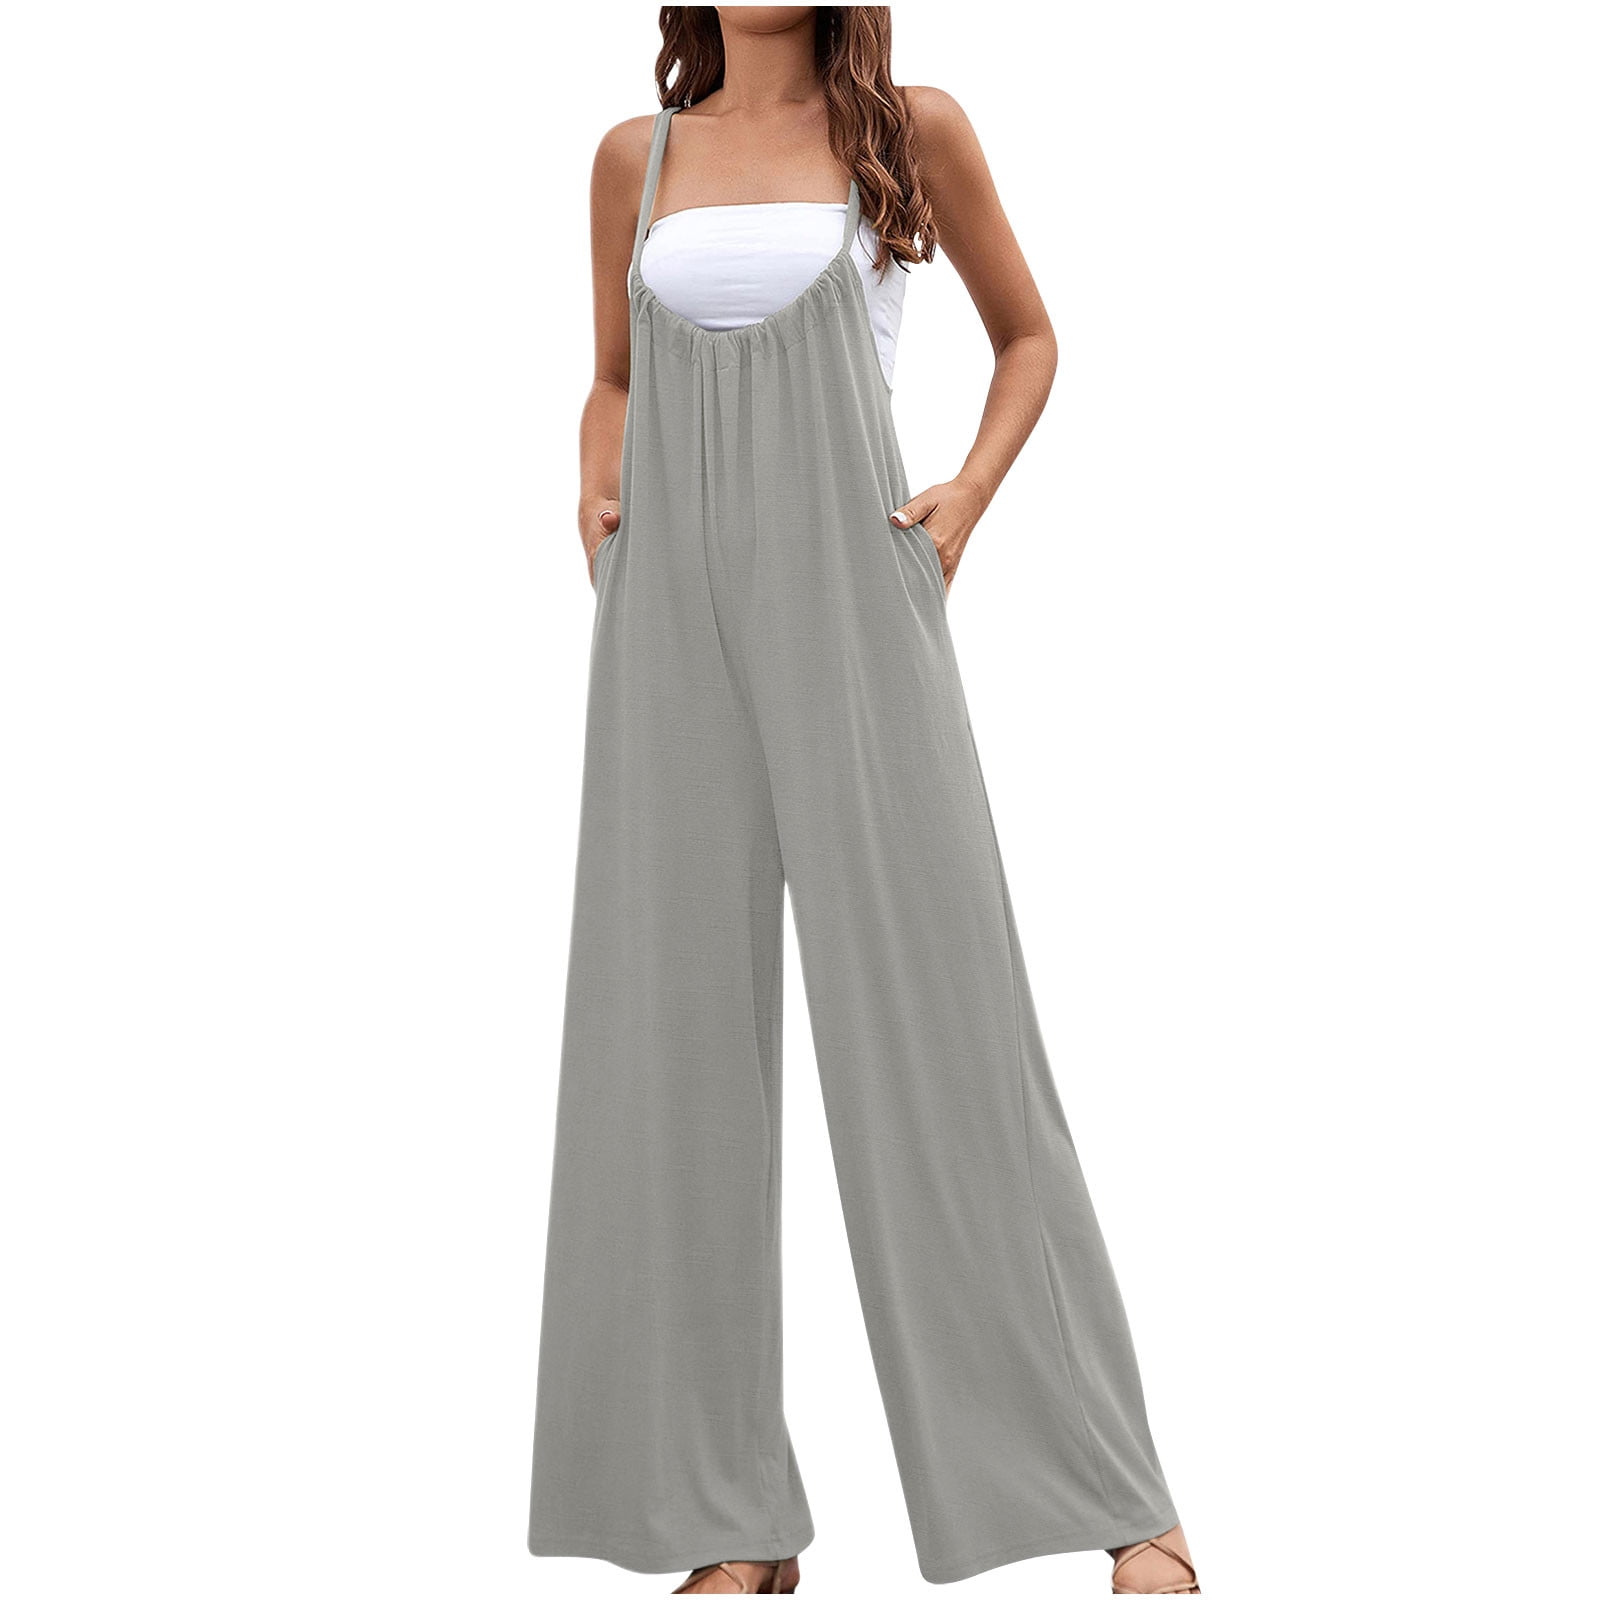 Jumpsuits & Co-ords | Blue Dangri For Women | Freeup